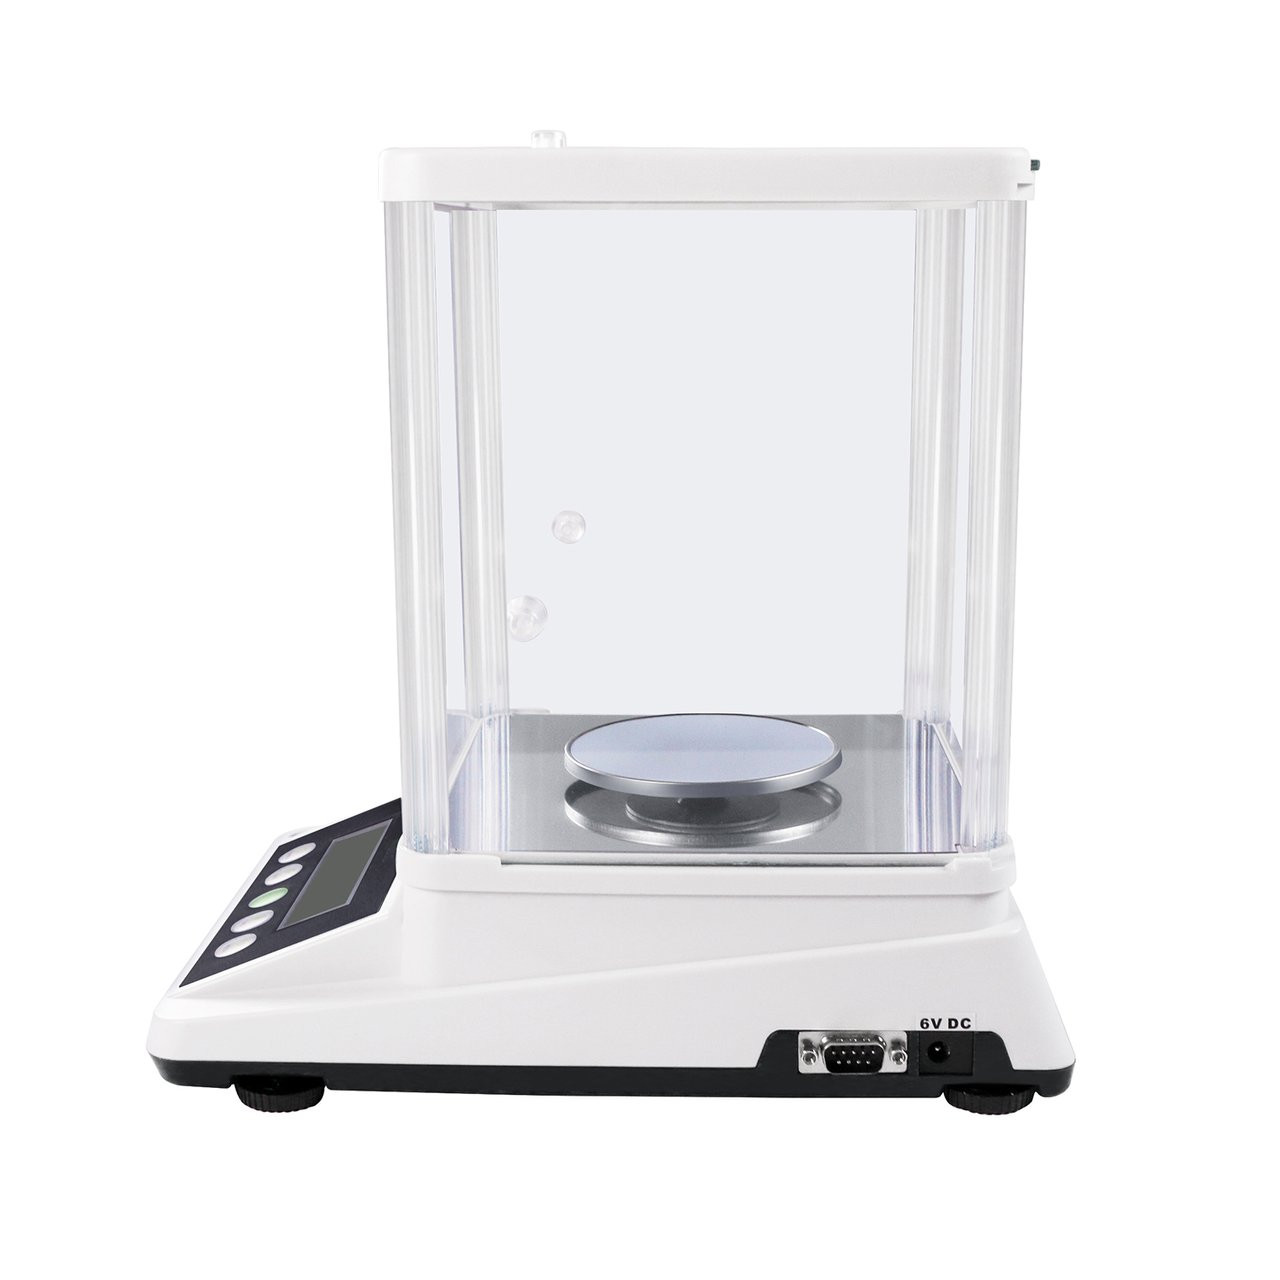 U.S. Solid 0.001 G Precision Balance - Digital Lab Scale 1 mg Analytical Electronic Balance with 2 LCD Screens, 110 G x 0.001g